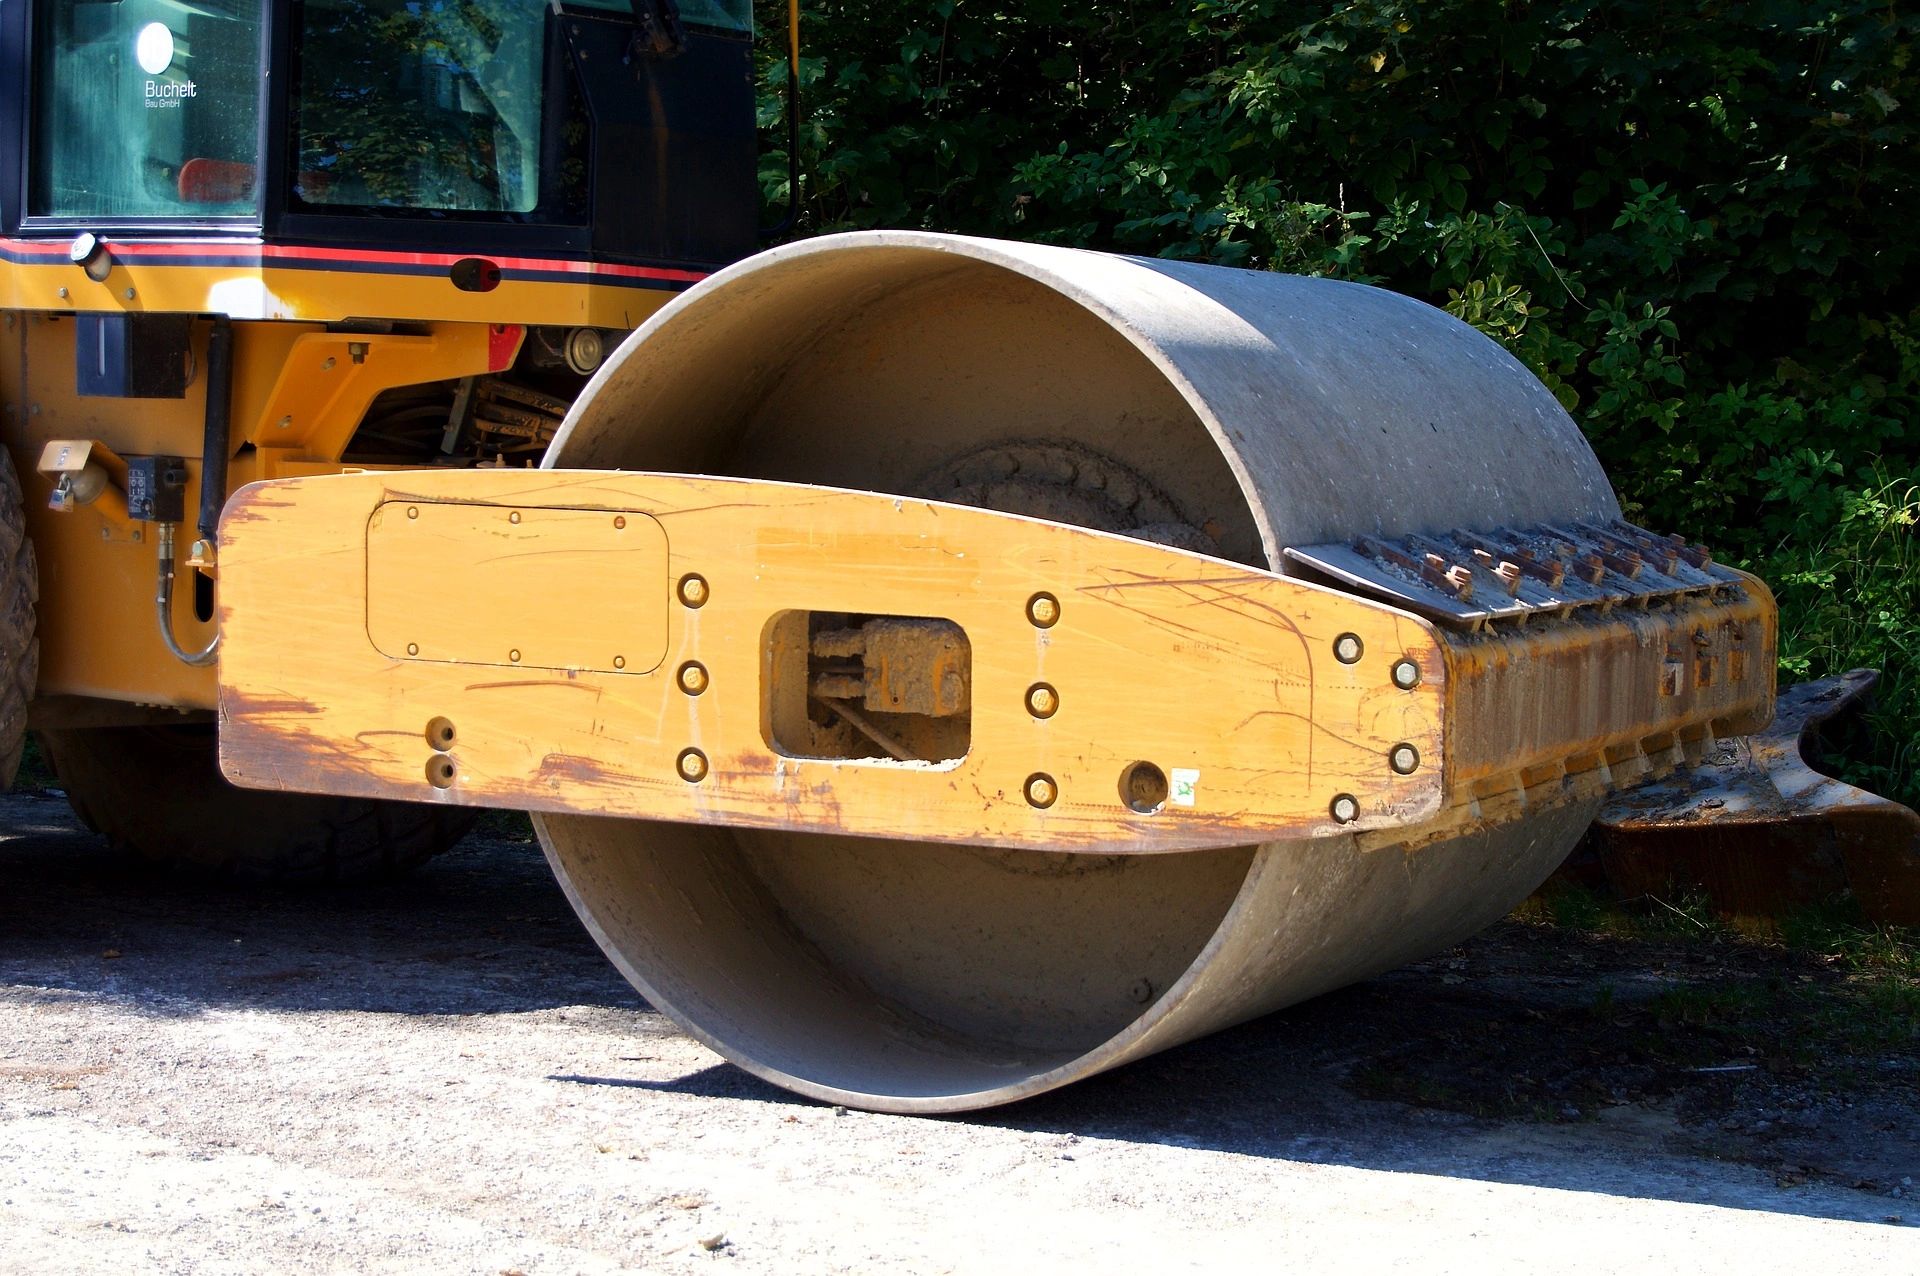 What Types Of Heavy Equipment Are Used In Asphalt Paving Projects